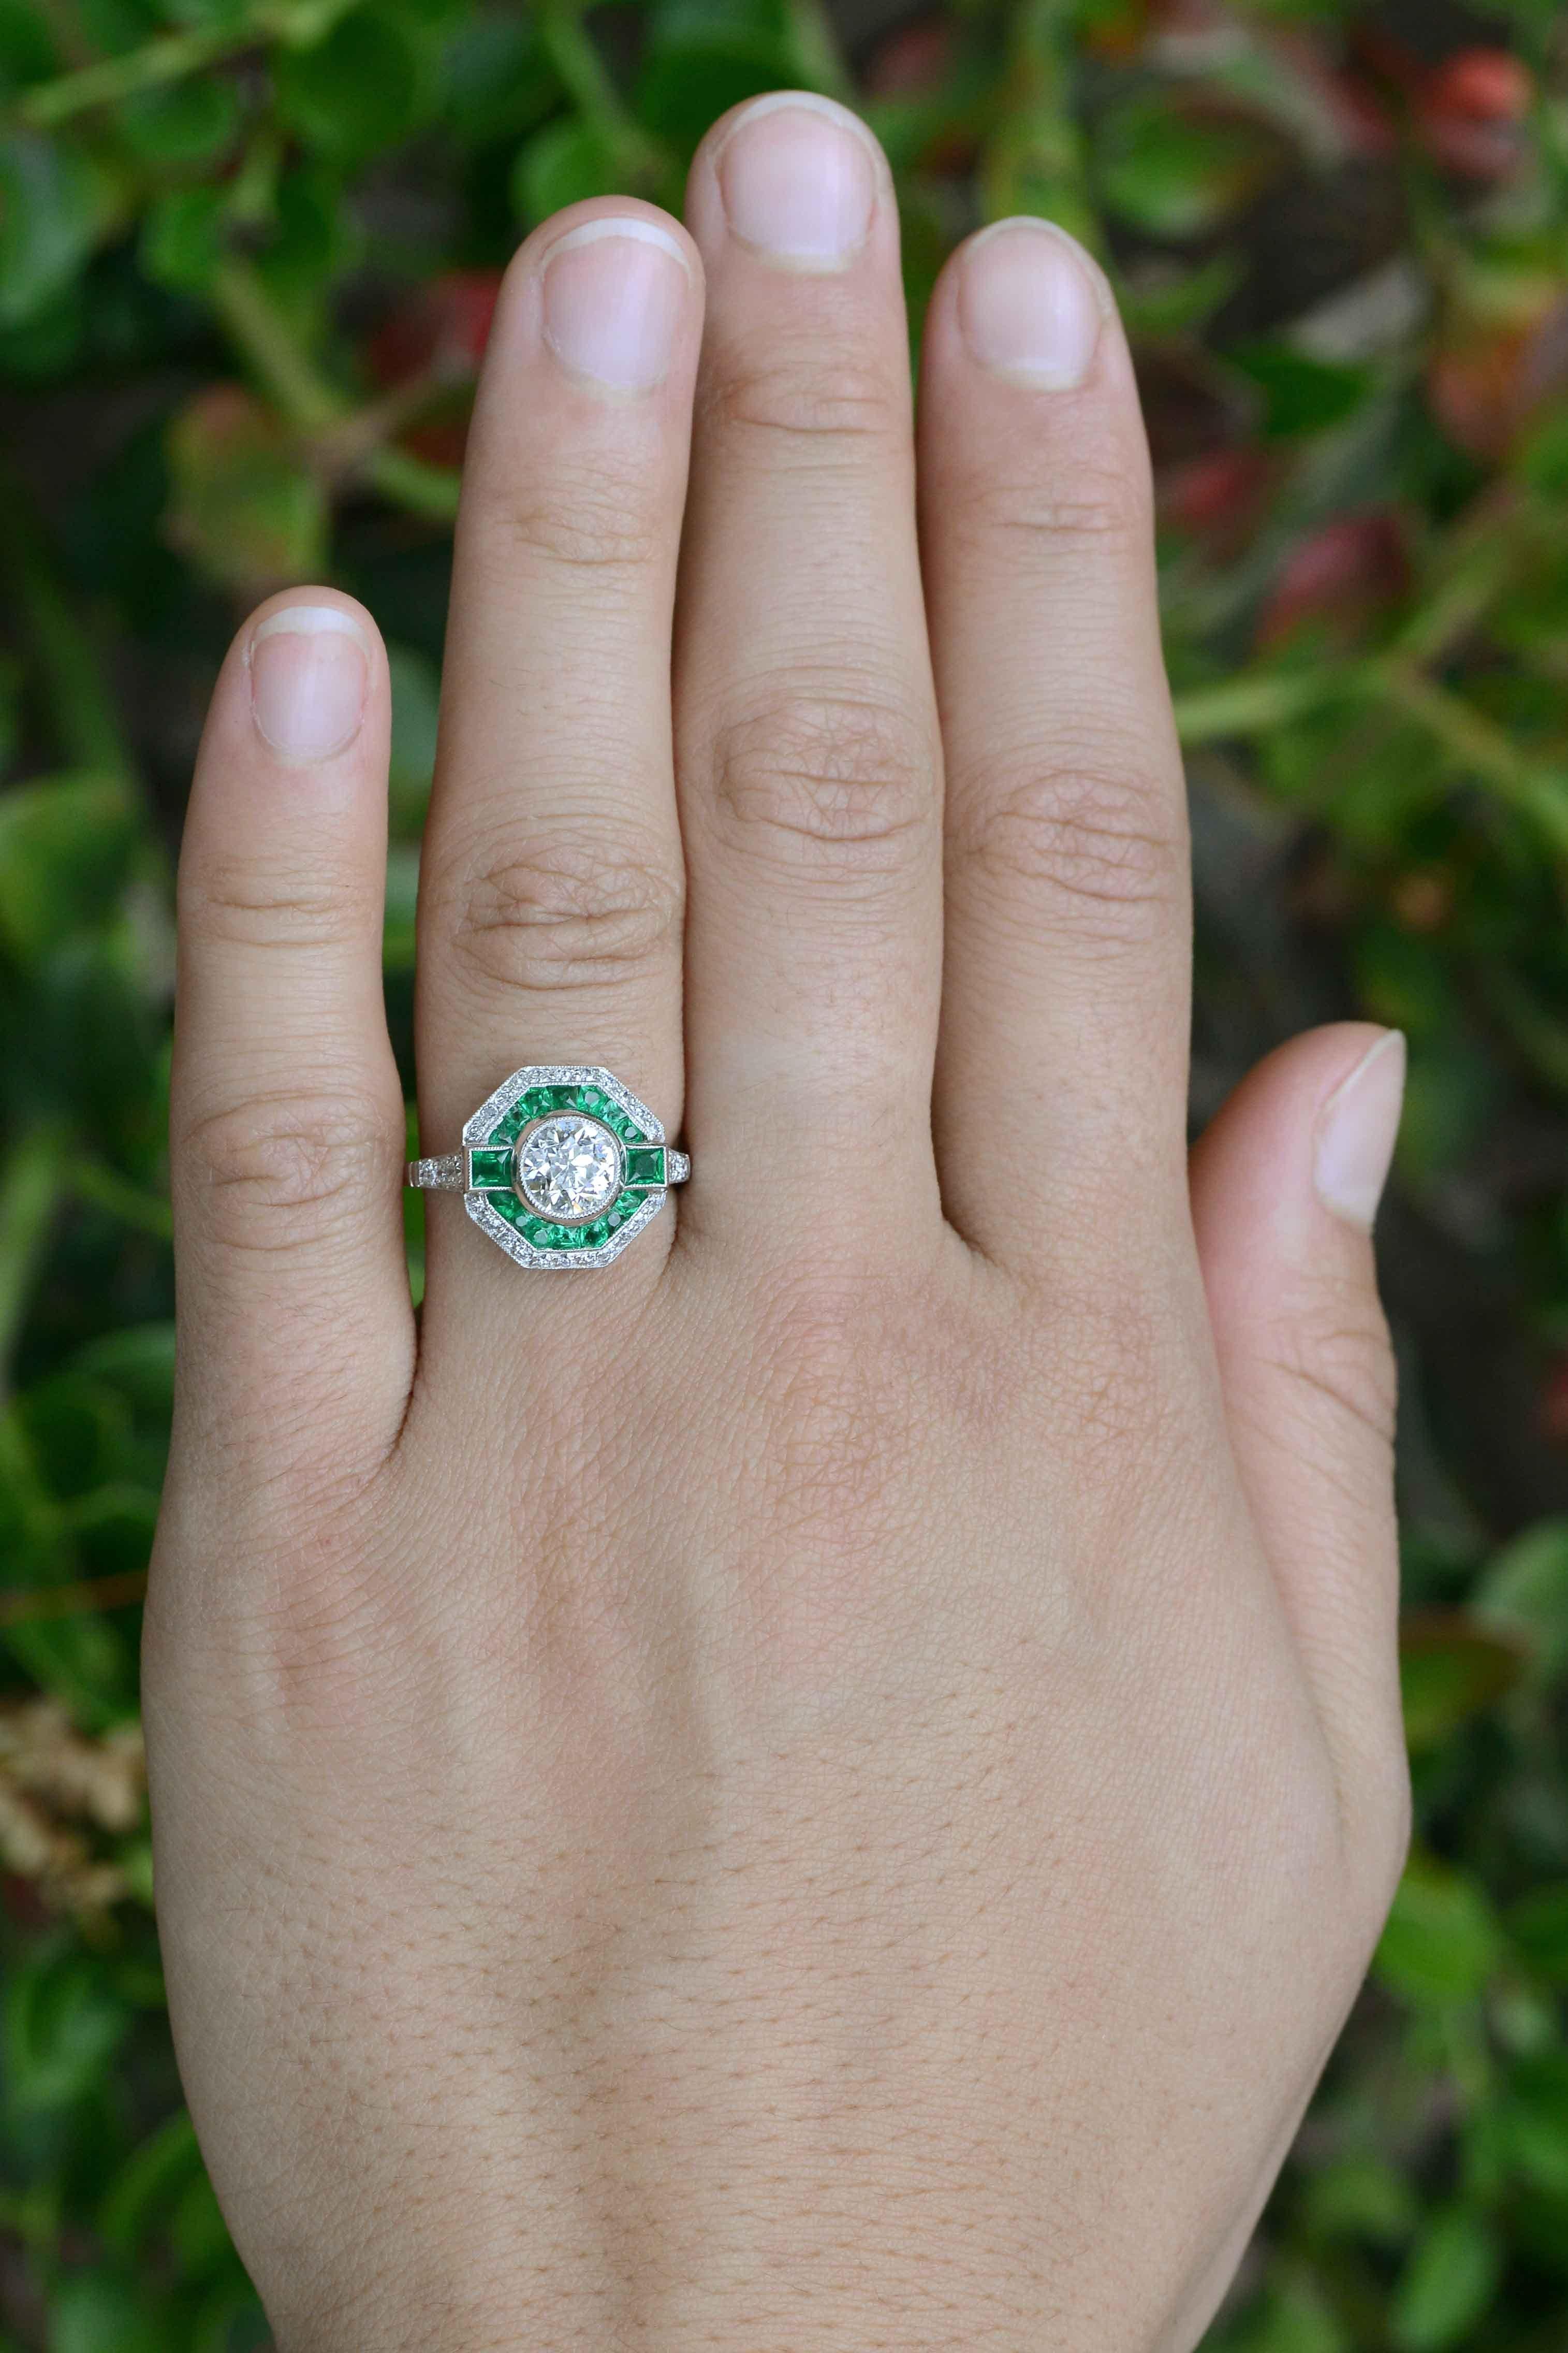 This ring is on hold for a customer.
Please message us if you are interested.

A fabulous example of Art Deco style jewelry, this gorgeous geometric emerald halo diamond engagement ring is a one of a kind treasure that is truly jaw dropping. Hand